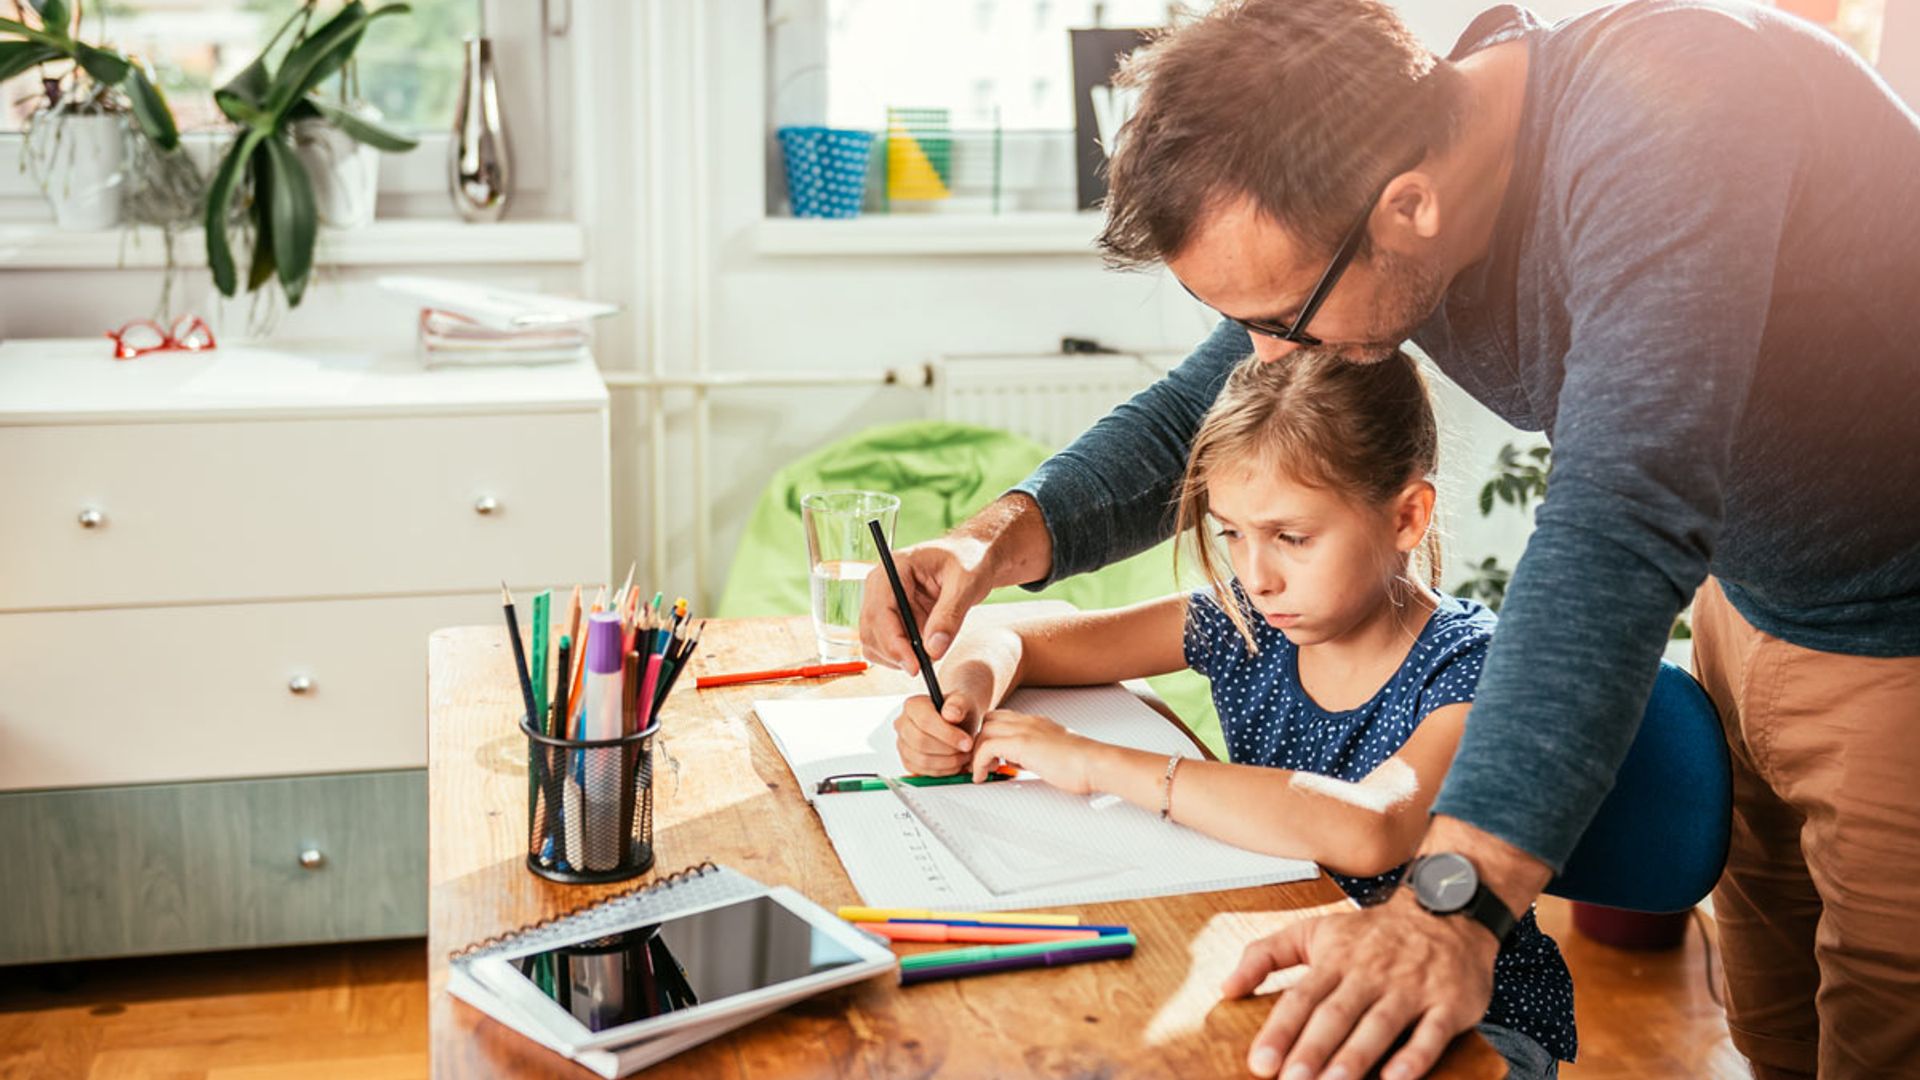 Home Schooling Advice For Well-Adjusted Children